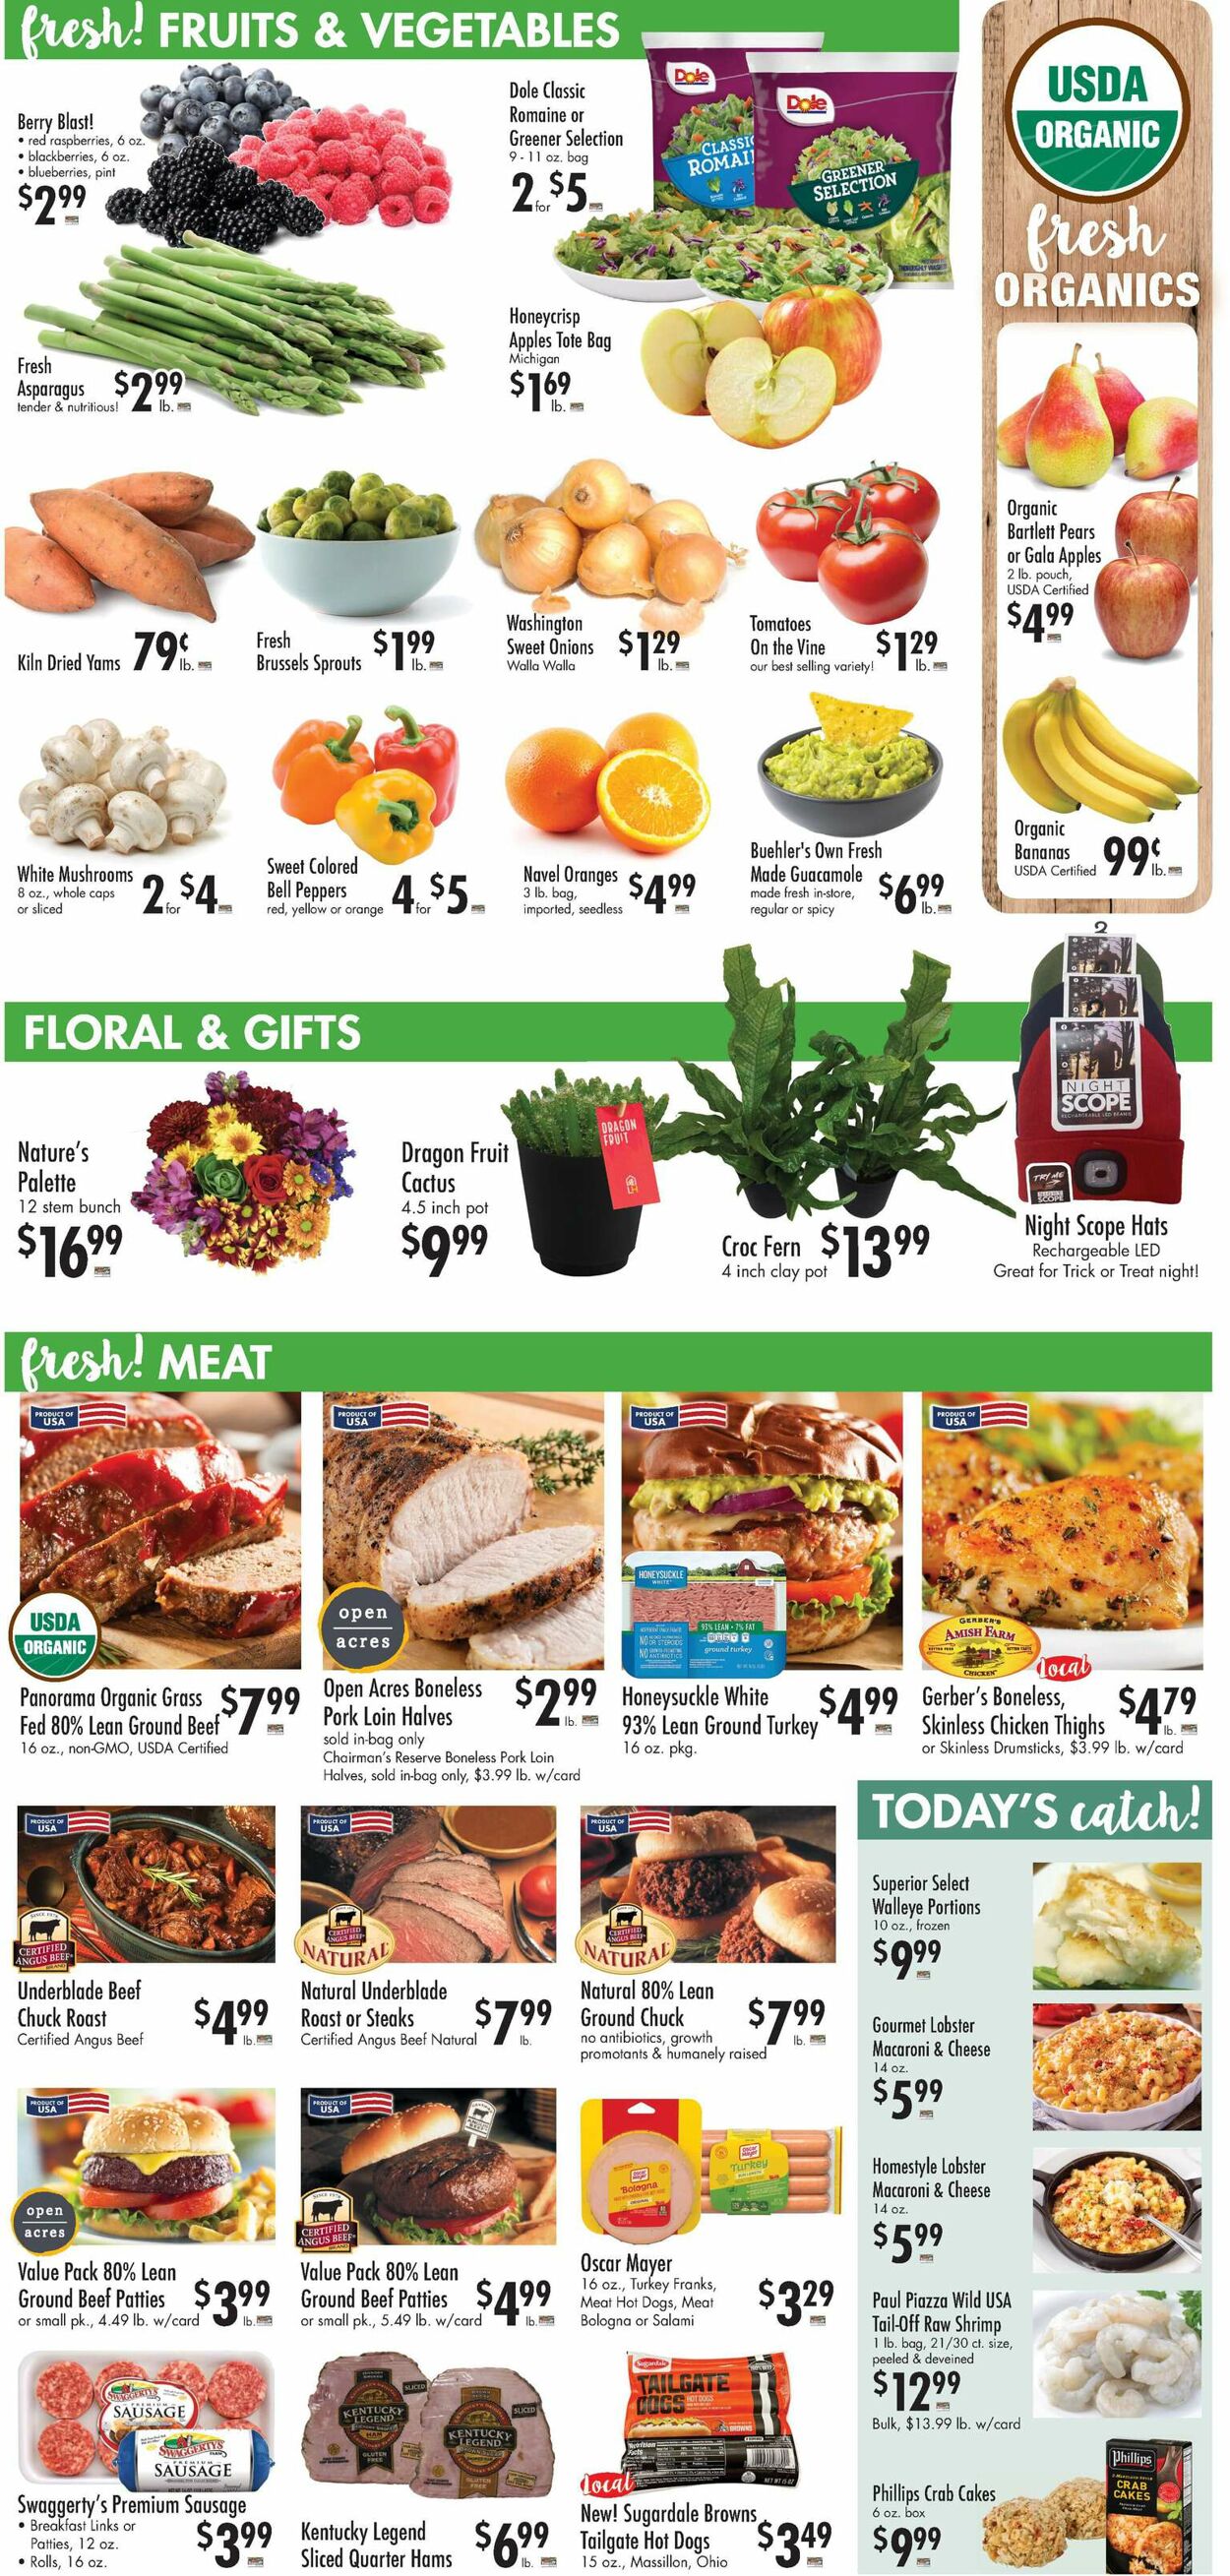 Catalogue Buehler's Fresh Foods from 10/19/2022